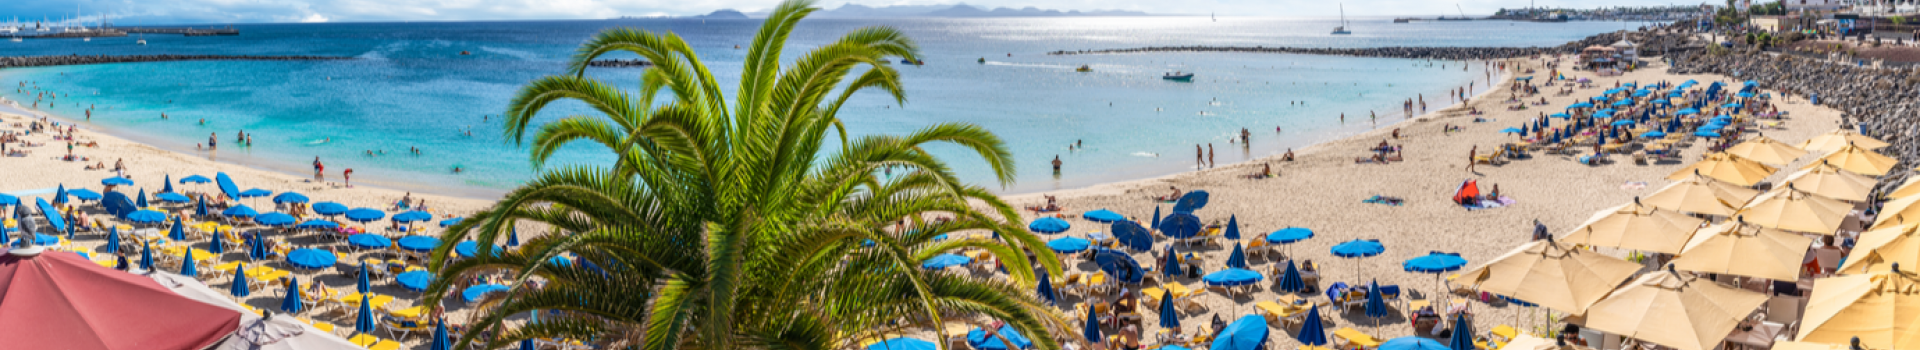 Last minute holidays to Lanzarote with Cassidy Travel